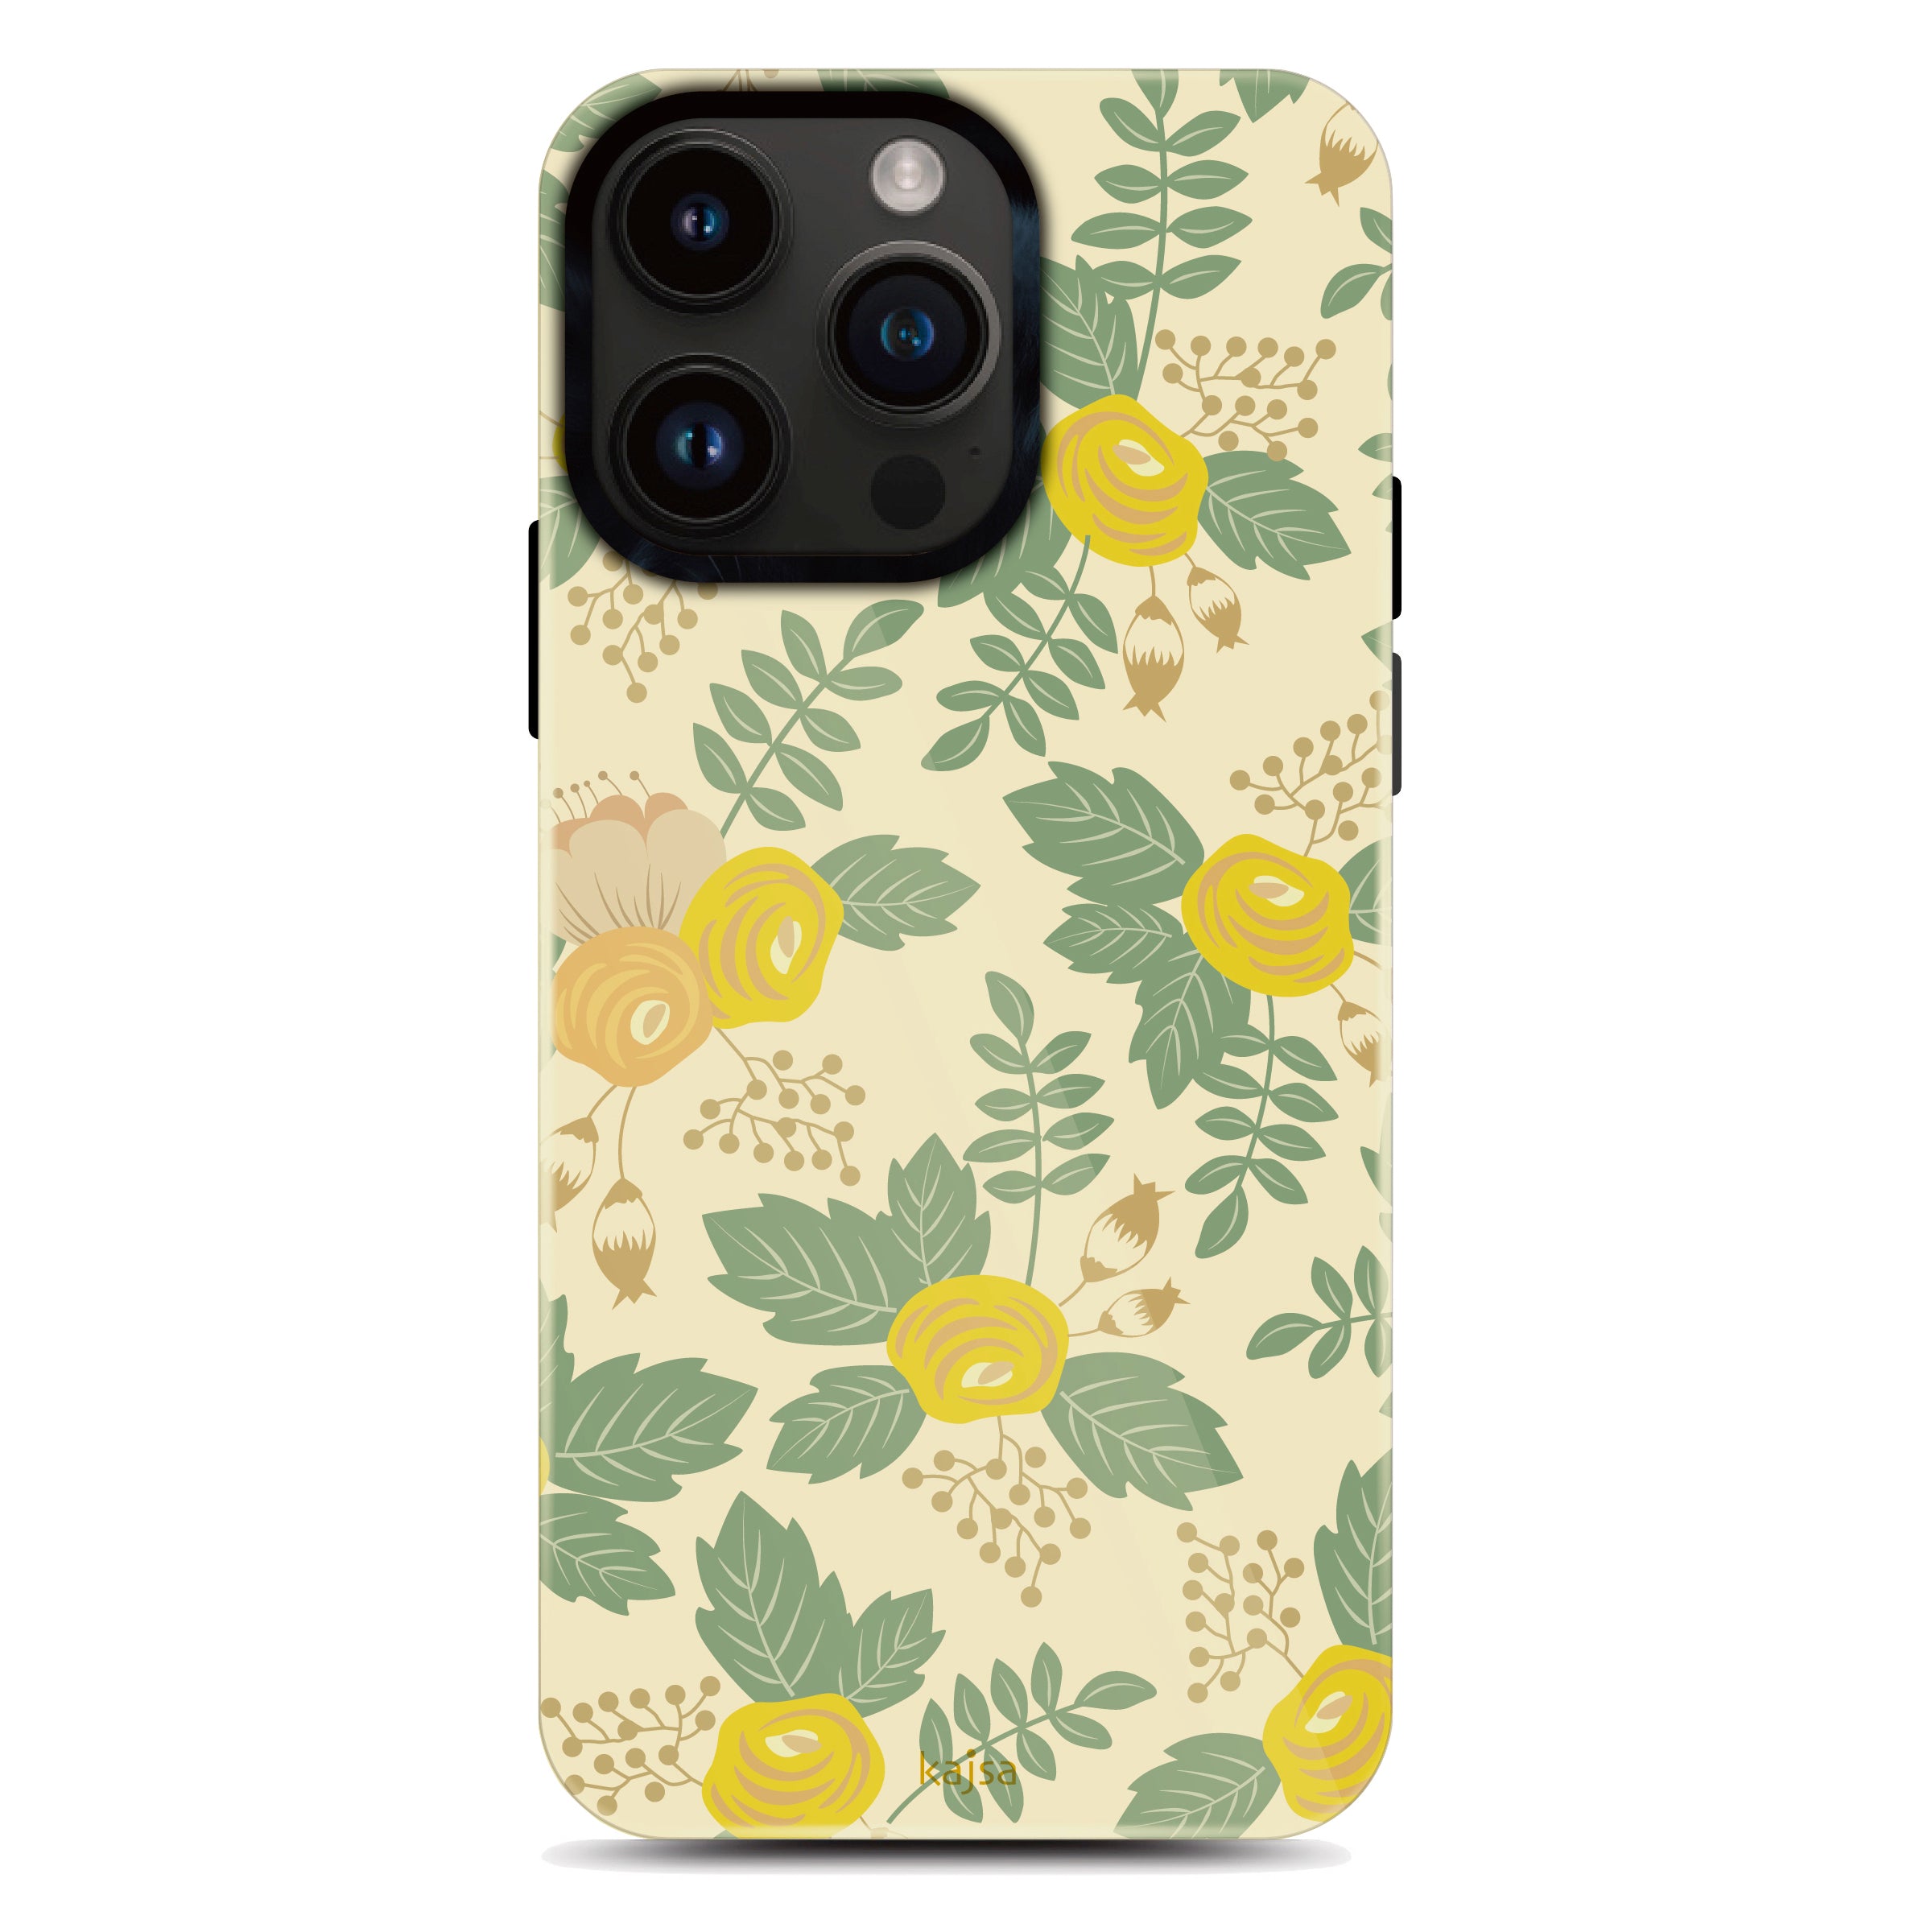 Floral Collection - Tropical Back Base for iPhone 14 (TY7)-Phone Case- phone case - phone cases- phone cover- iphone cover- iphone case- iphone cases- leather case- leather cases- DIYCASE - custom case - leather cover - hand strap case - croco pattern case - snake pattern case - carbon fiber phone case - phone case brand - unique phone case - high quality - phone case brand - protective case - buy phone case hong kong - online buy phone case - iphone‎手機殼 - 客製化手機殼 - samsung ‎手機殼 - 香港手機殼 - 買電話殼